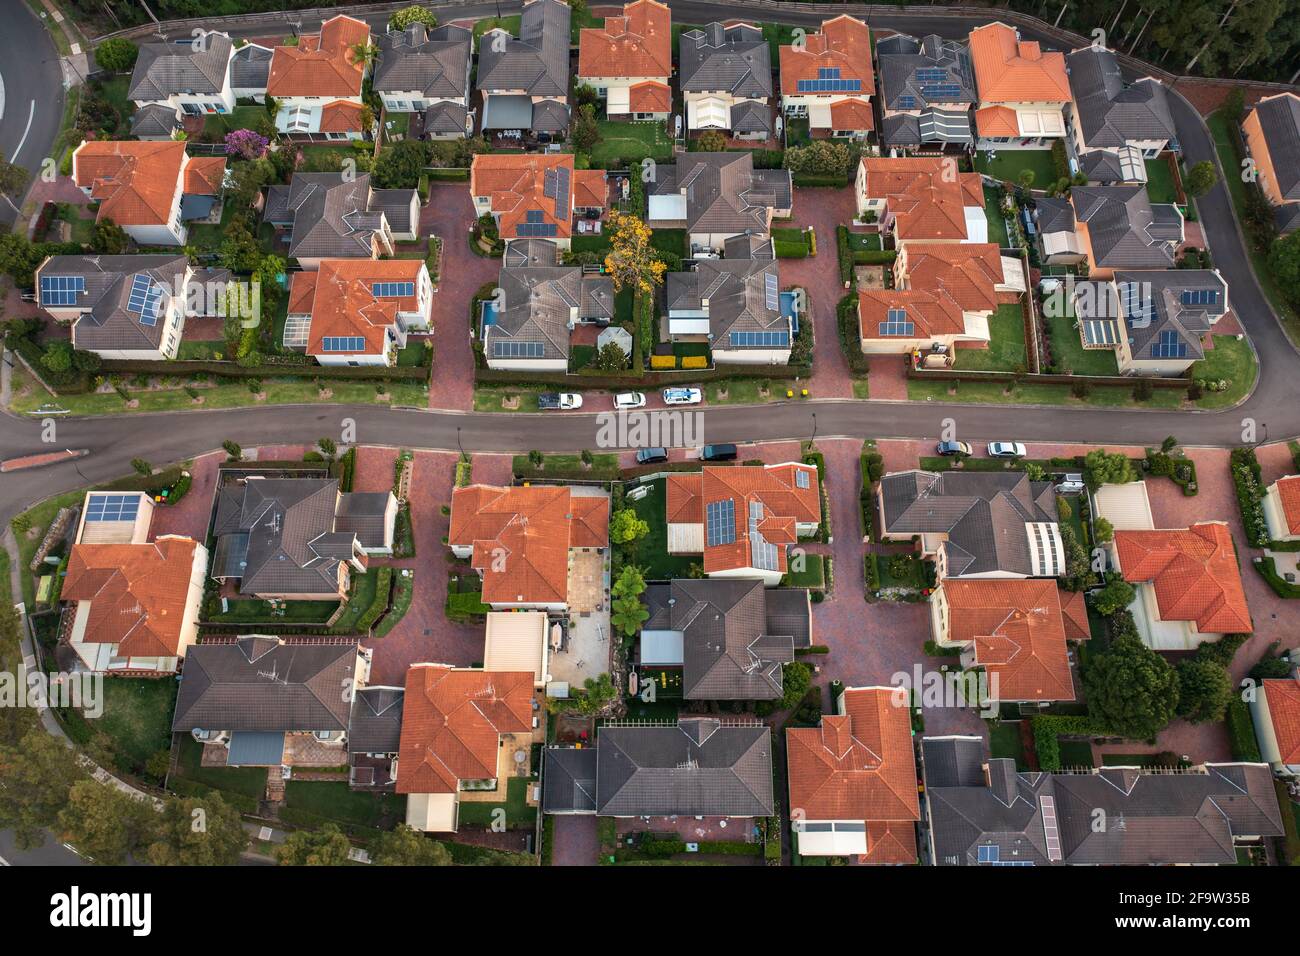 Aerial view of an average neighbourhood of similar detached houses built around 2000-2010, outer Sydney, Australia. Stock Photo